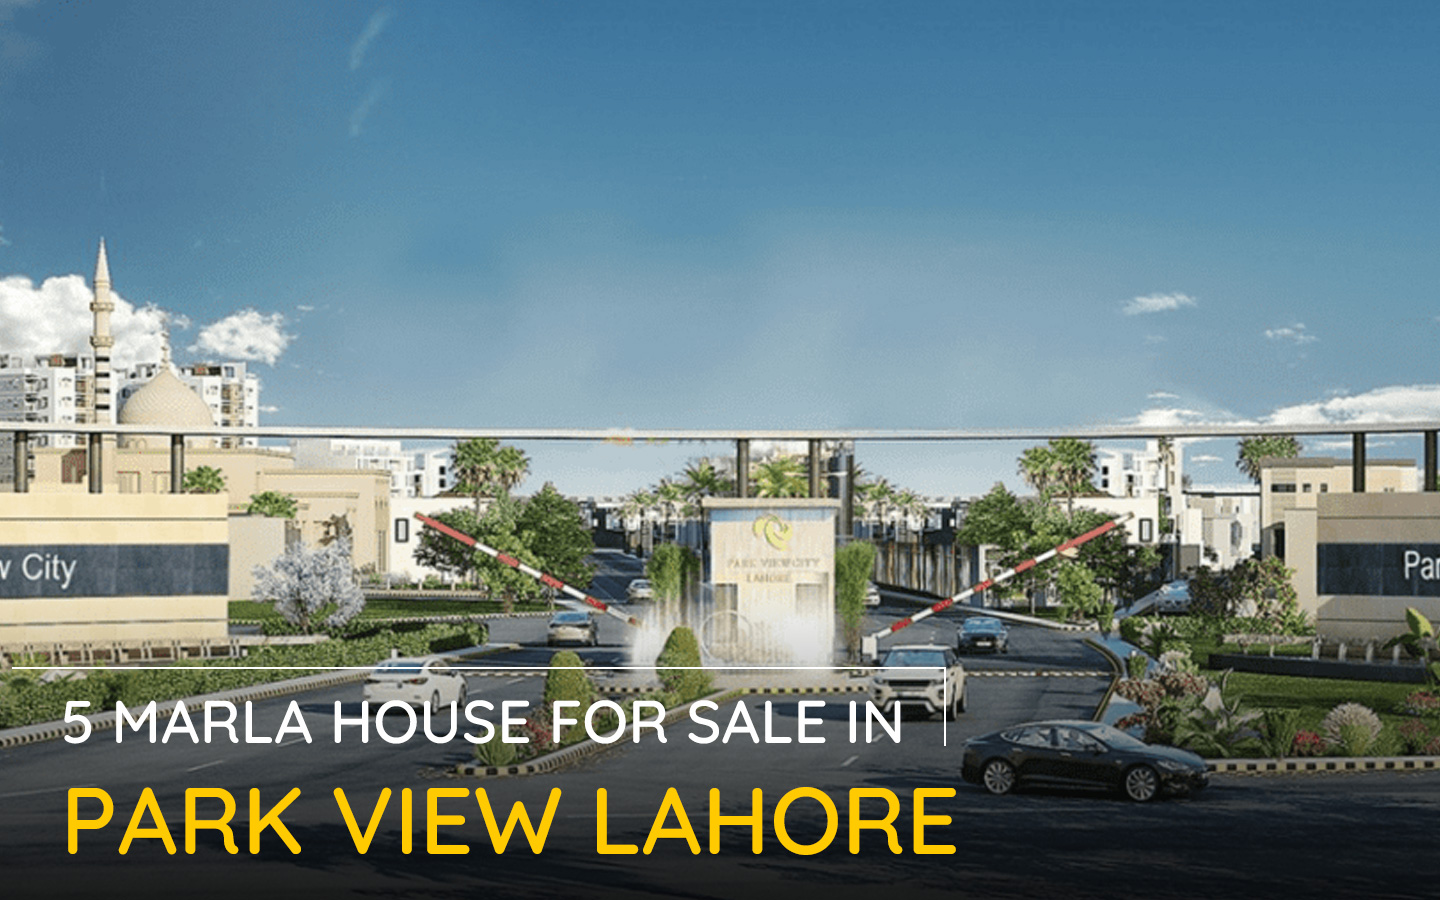 5 Marla House for Sale in Park View Lahore